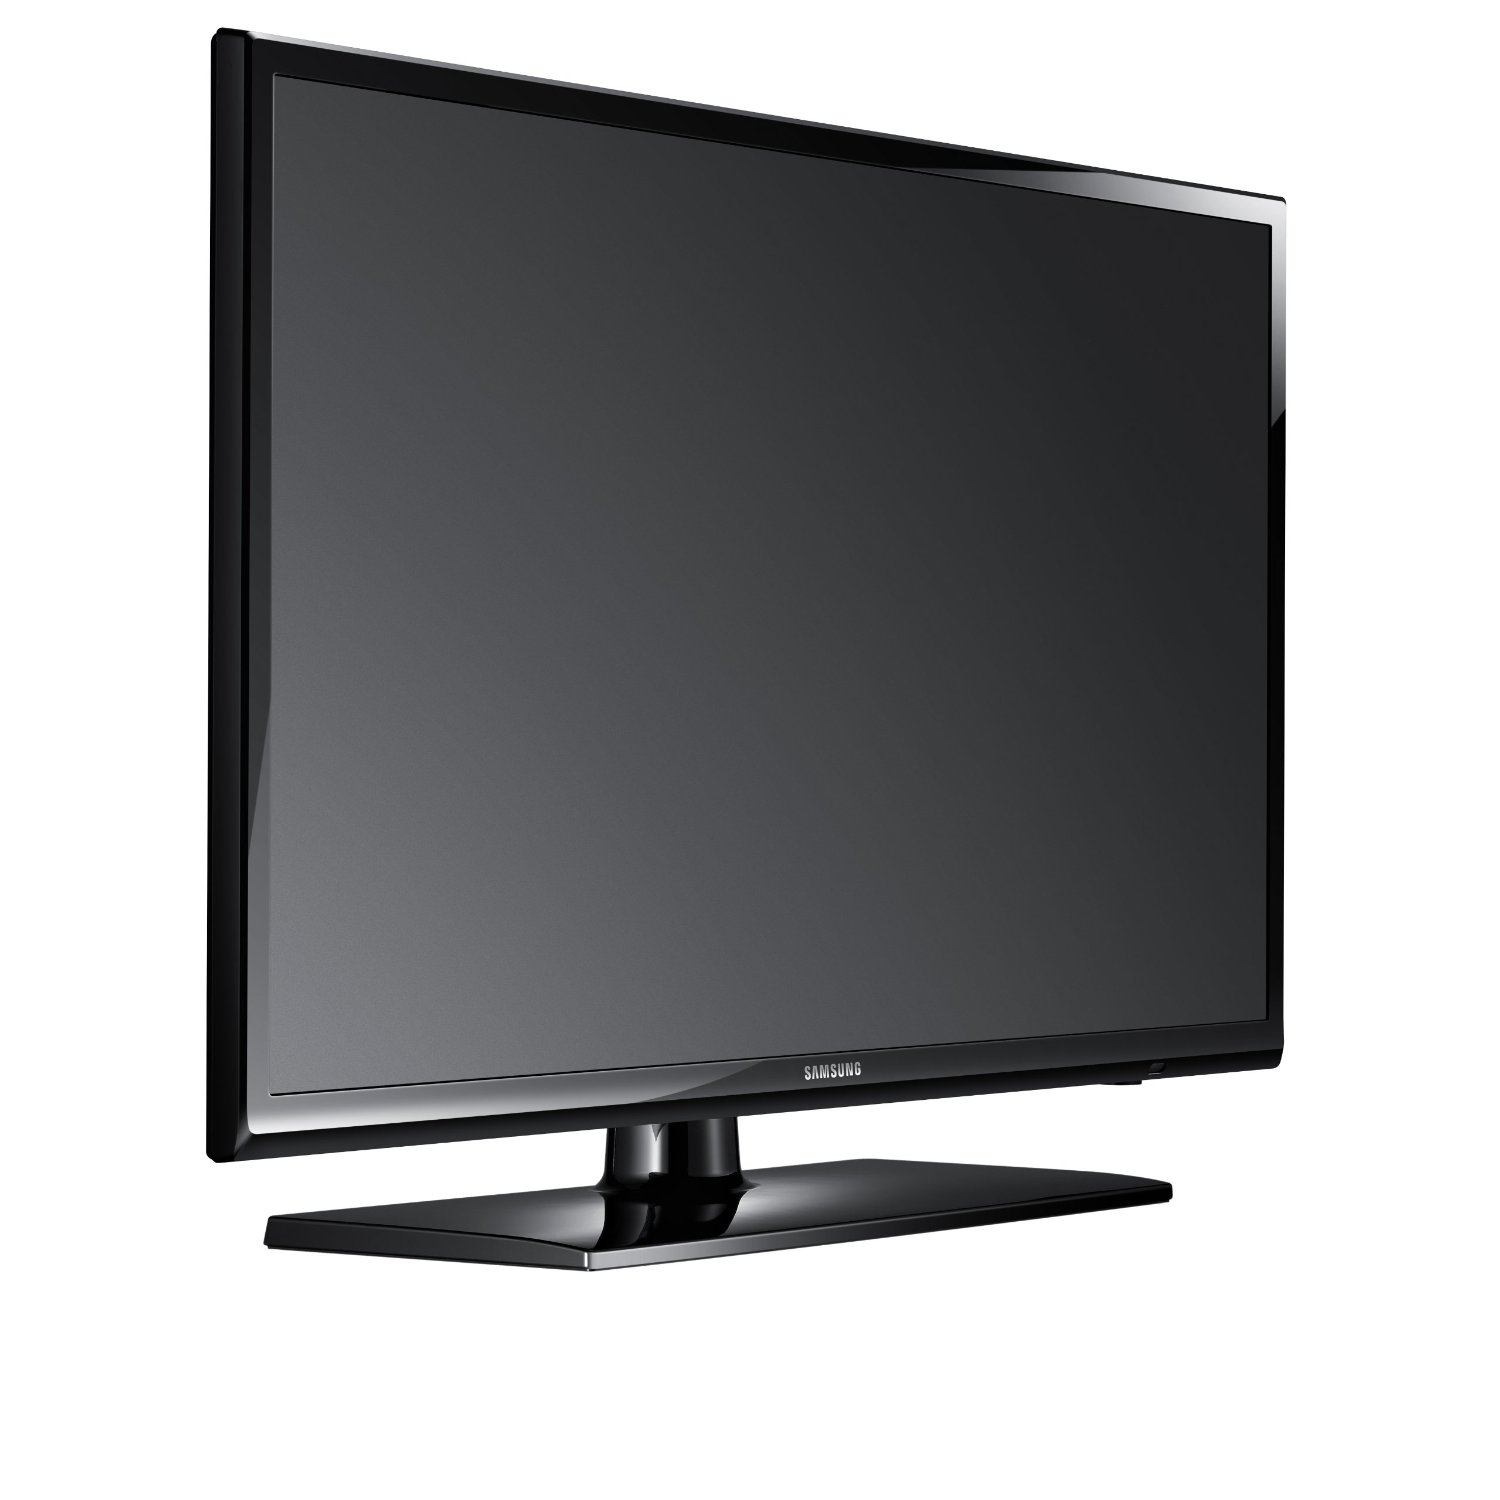 Diplomat reliability bag Samsung 32 inch LED TV review and price -